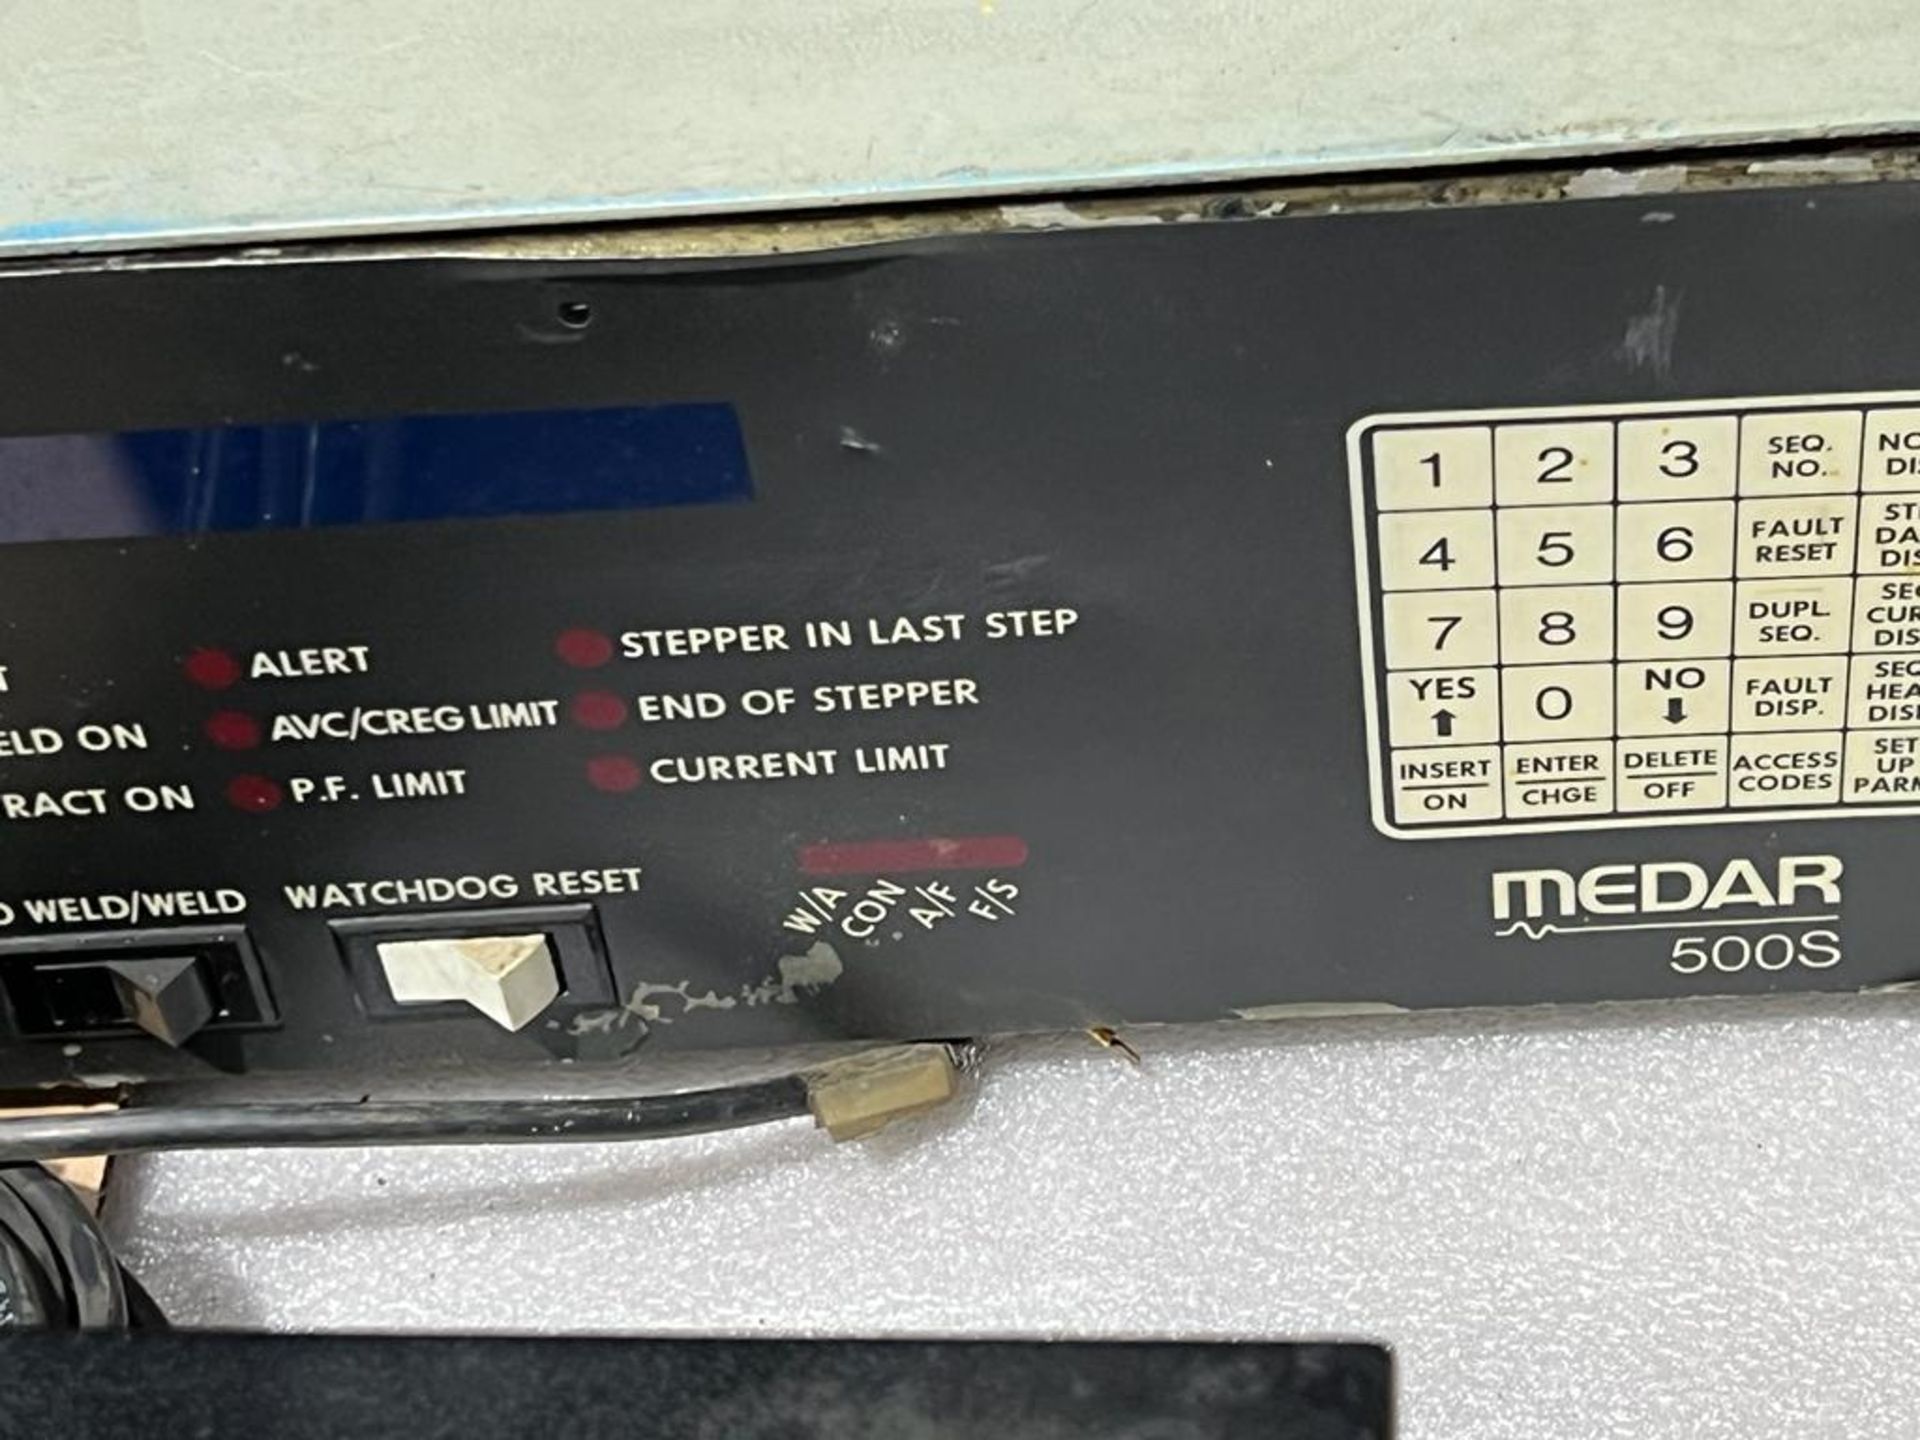 Lot of 5 (5 units) Misc Controllers - Worcester Controls, Veeder Root, Medar 500S, MB Dynamics - Image 2 of 5